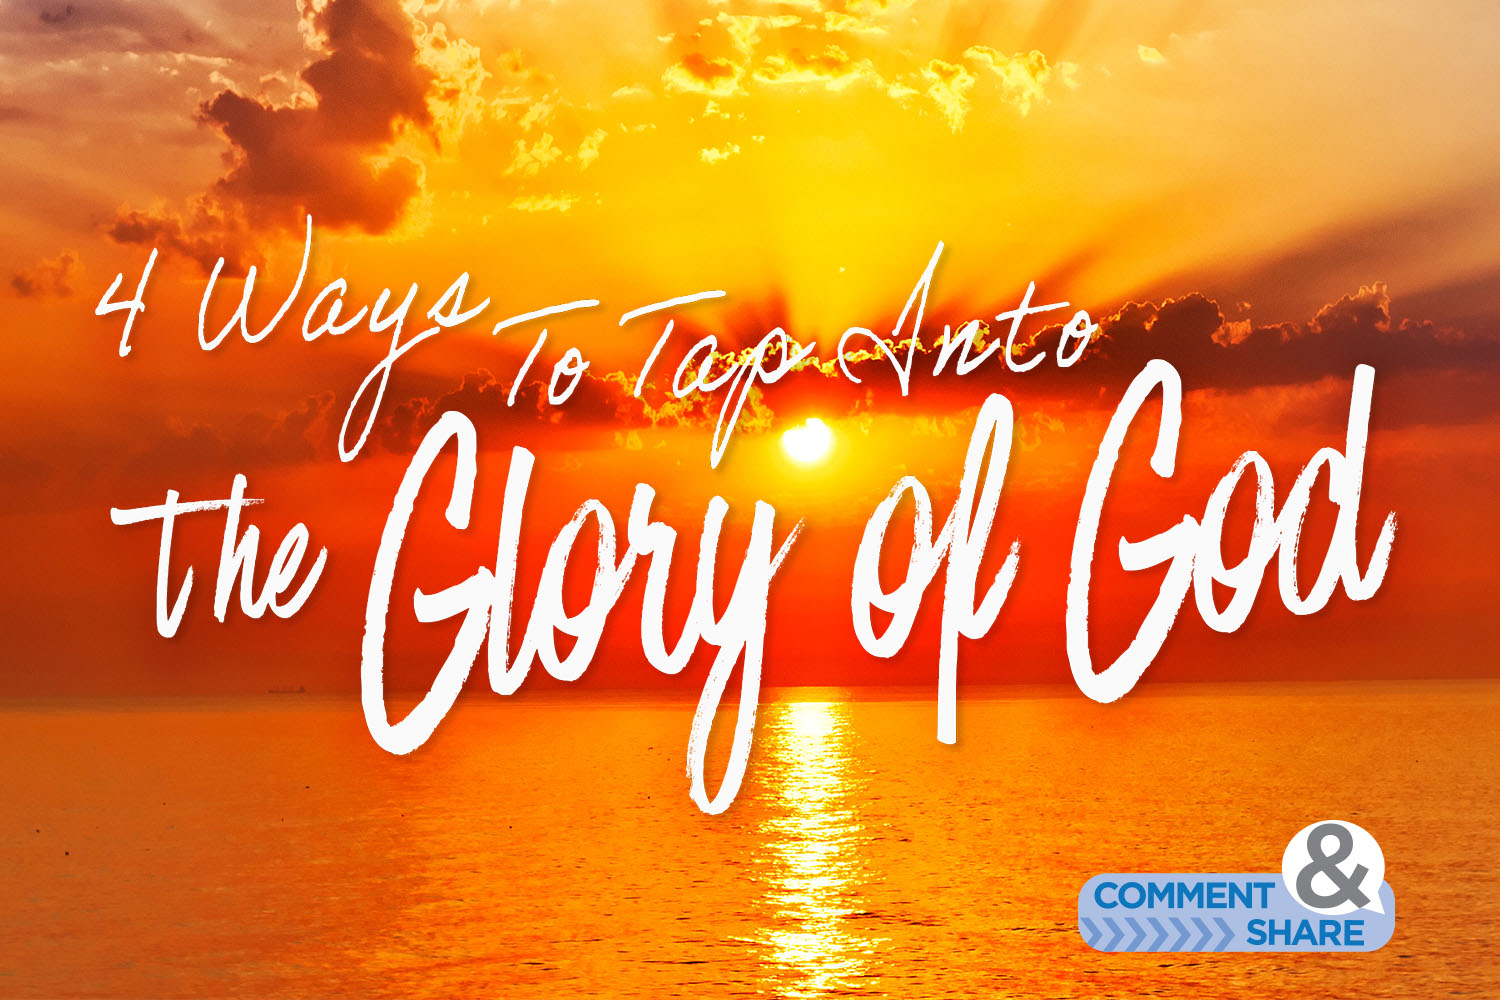 4 Ways To Tap Into the Glory of God - KCM Blog